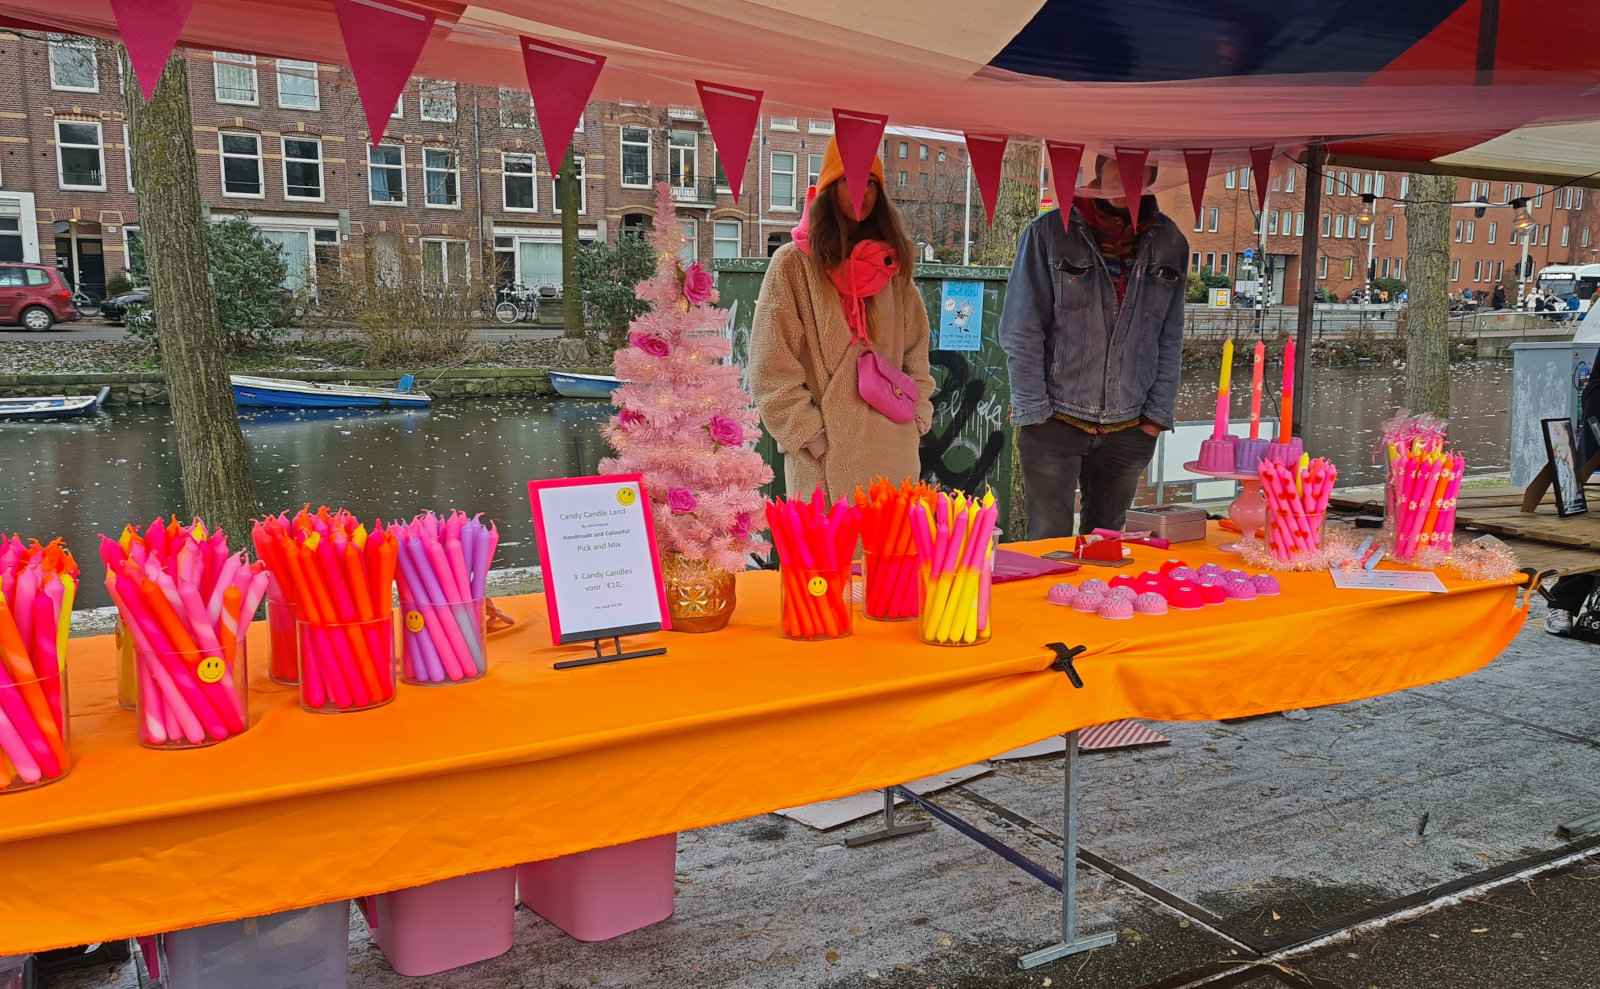 A market stall selling very bright pink and orange candles.